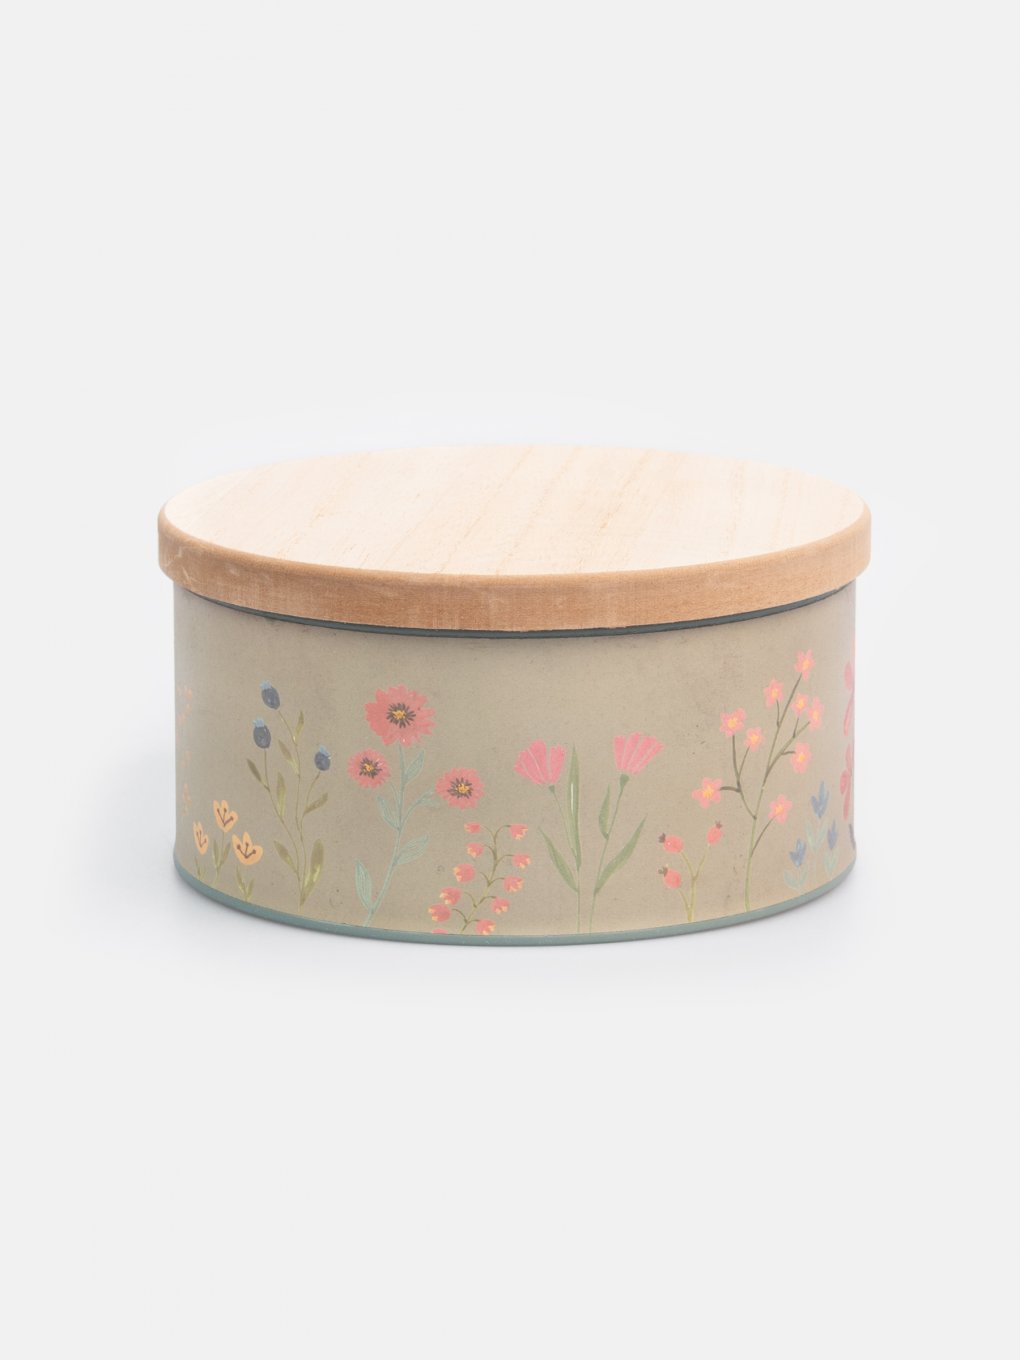 Iron box with wooden lid and floral design